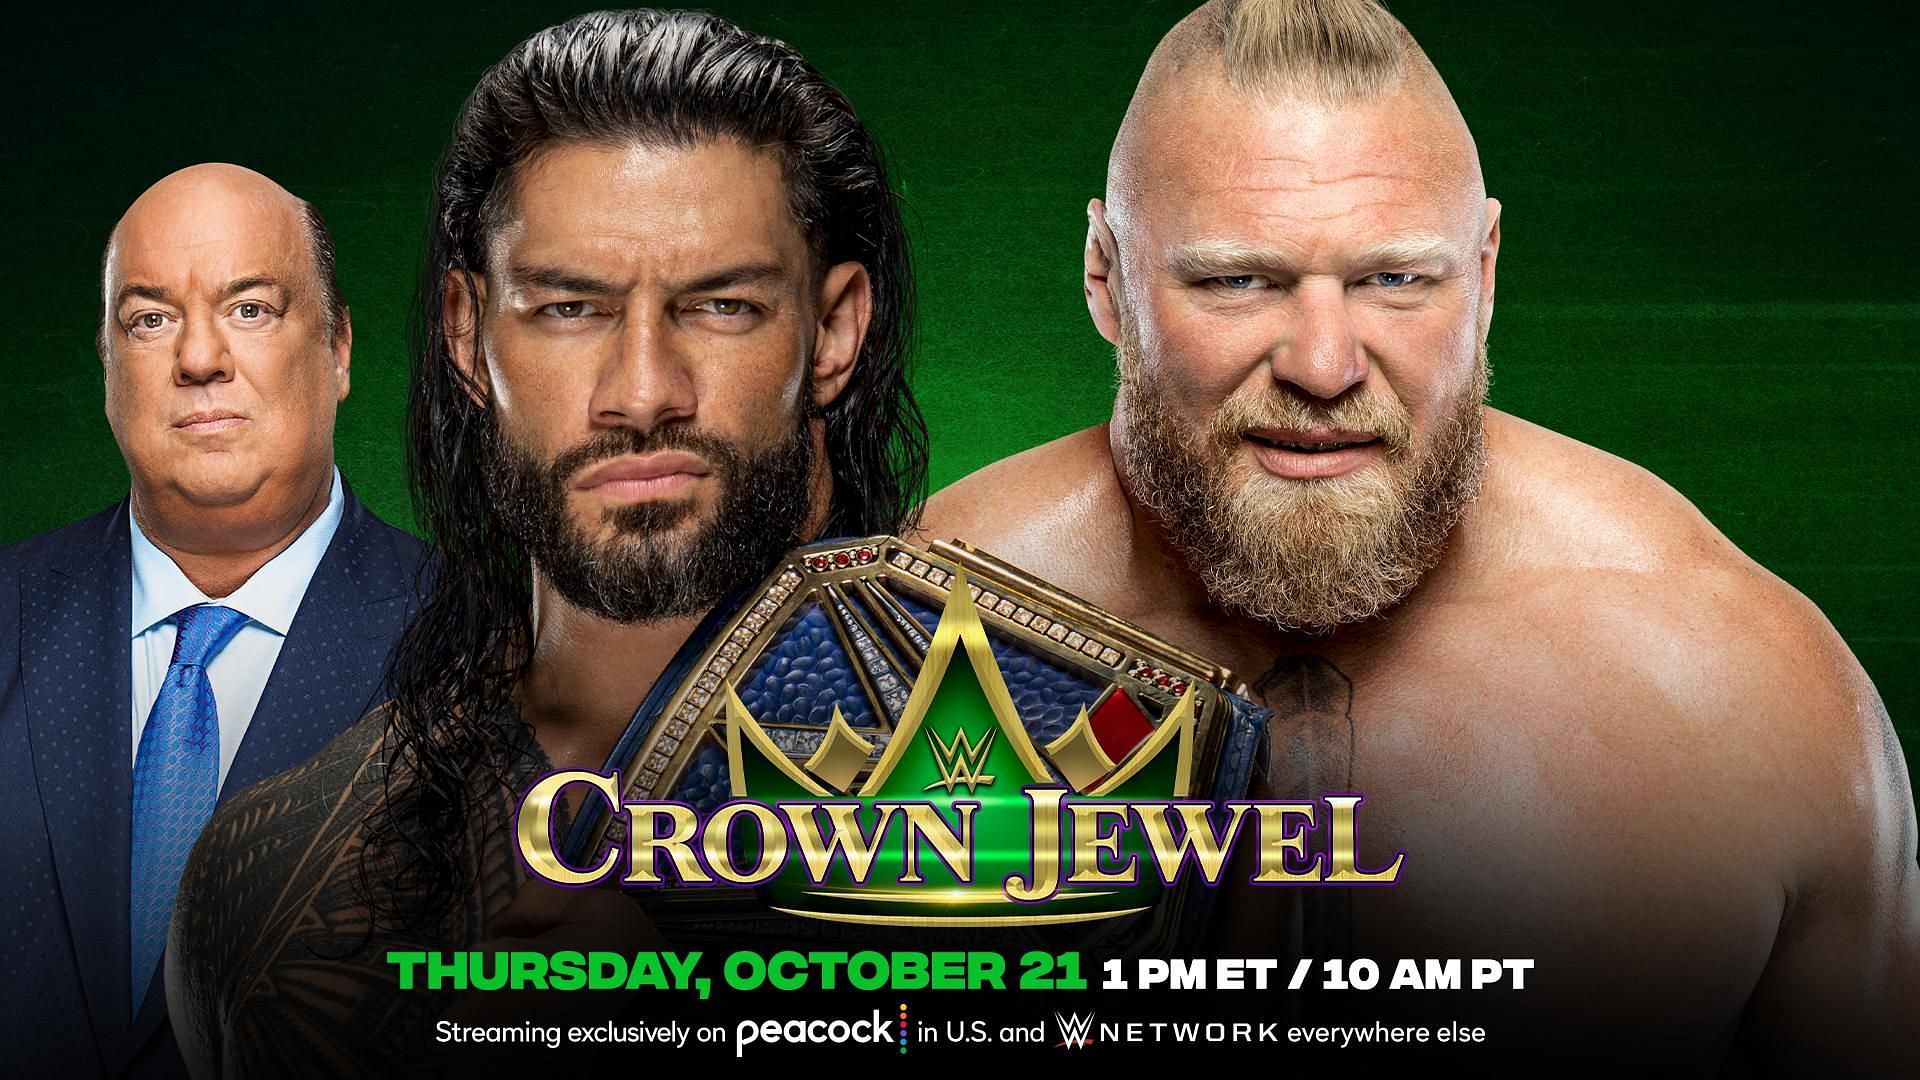 WWE Crown Jewel 2021 has been one of the best-built pay-per-views of the year.